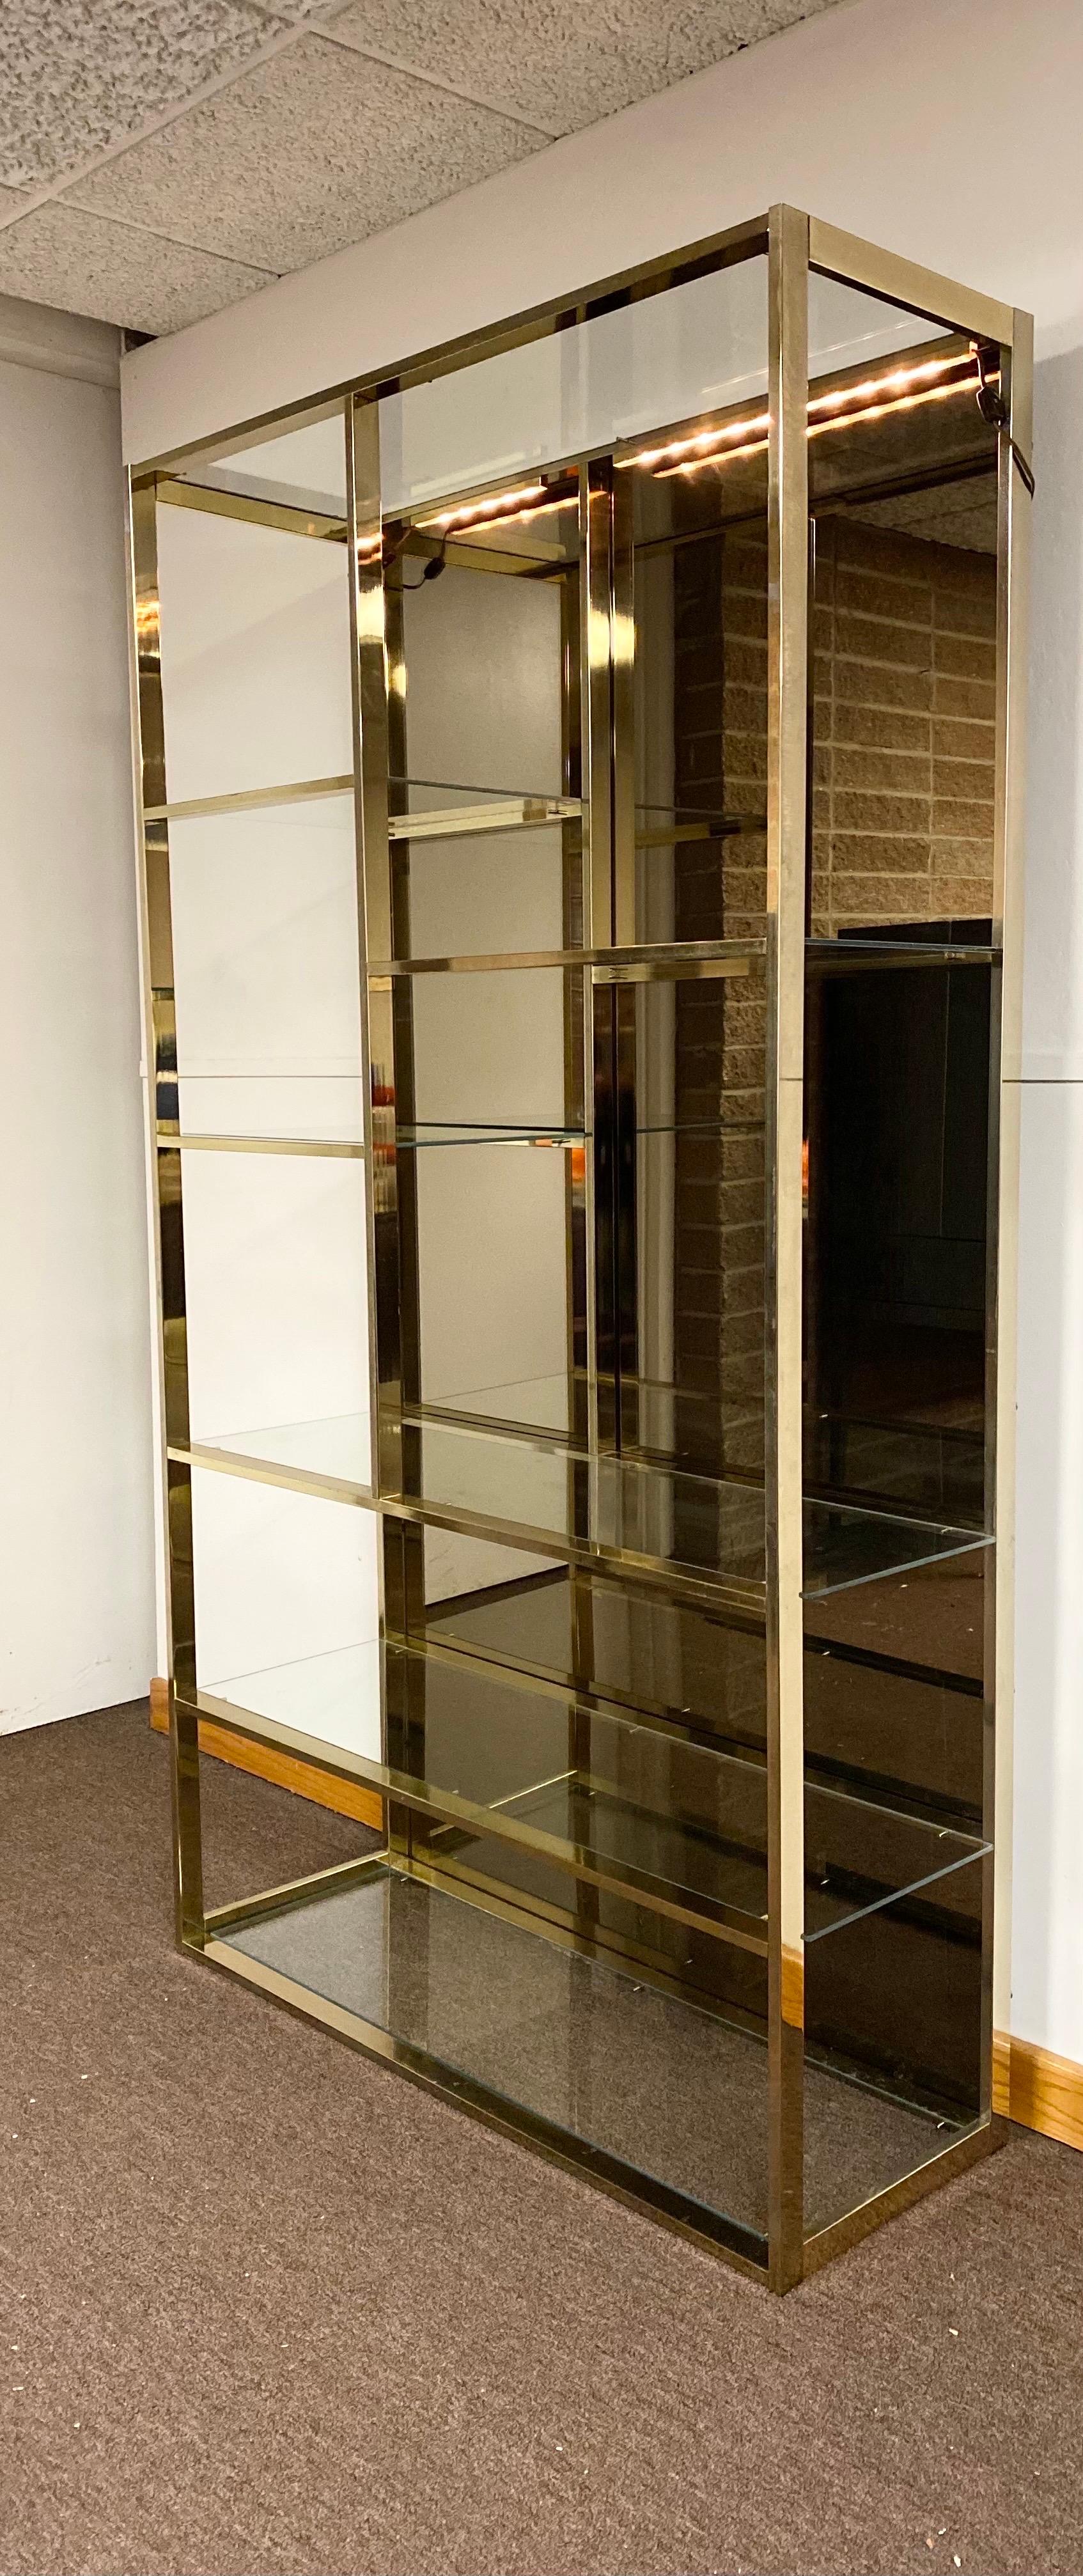 North American 1970s Mid-Century Modern Polished Brass Glass and Mirror Etagere